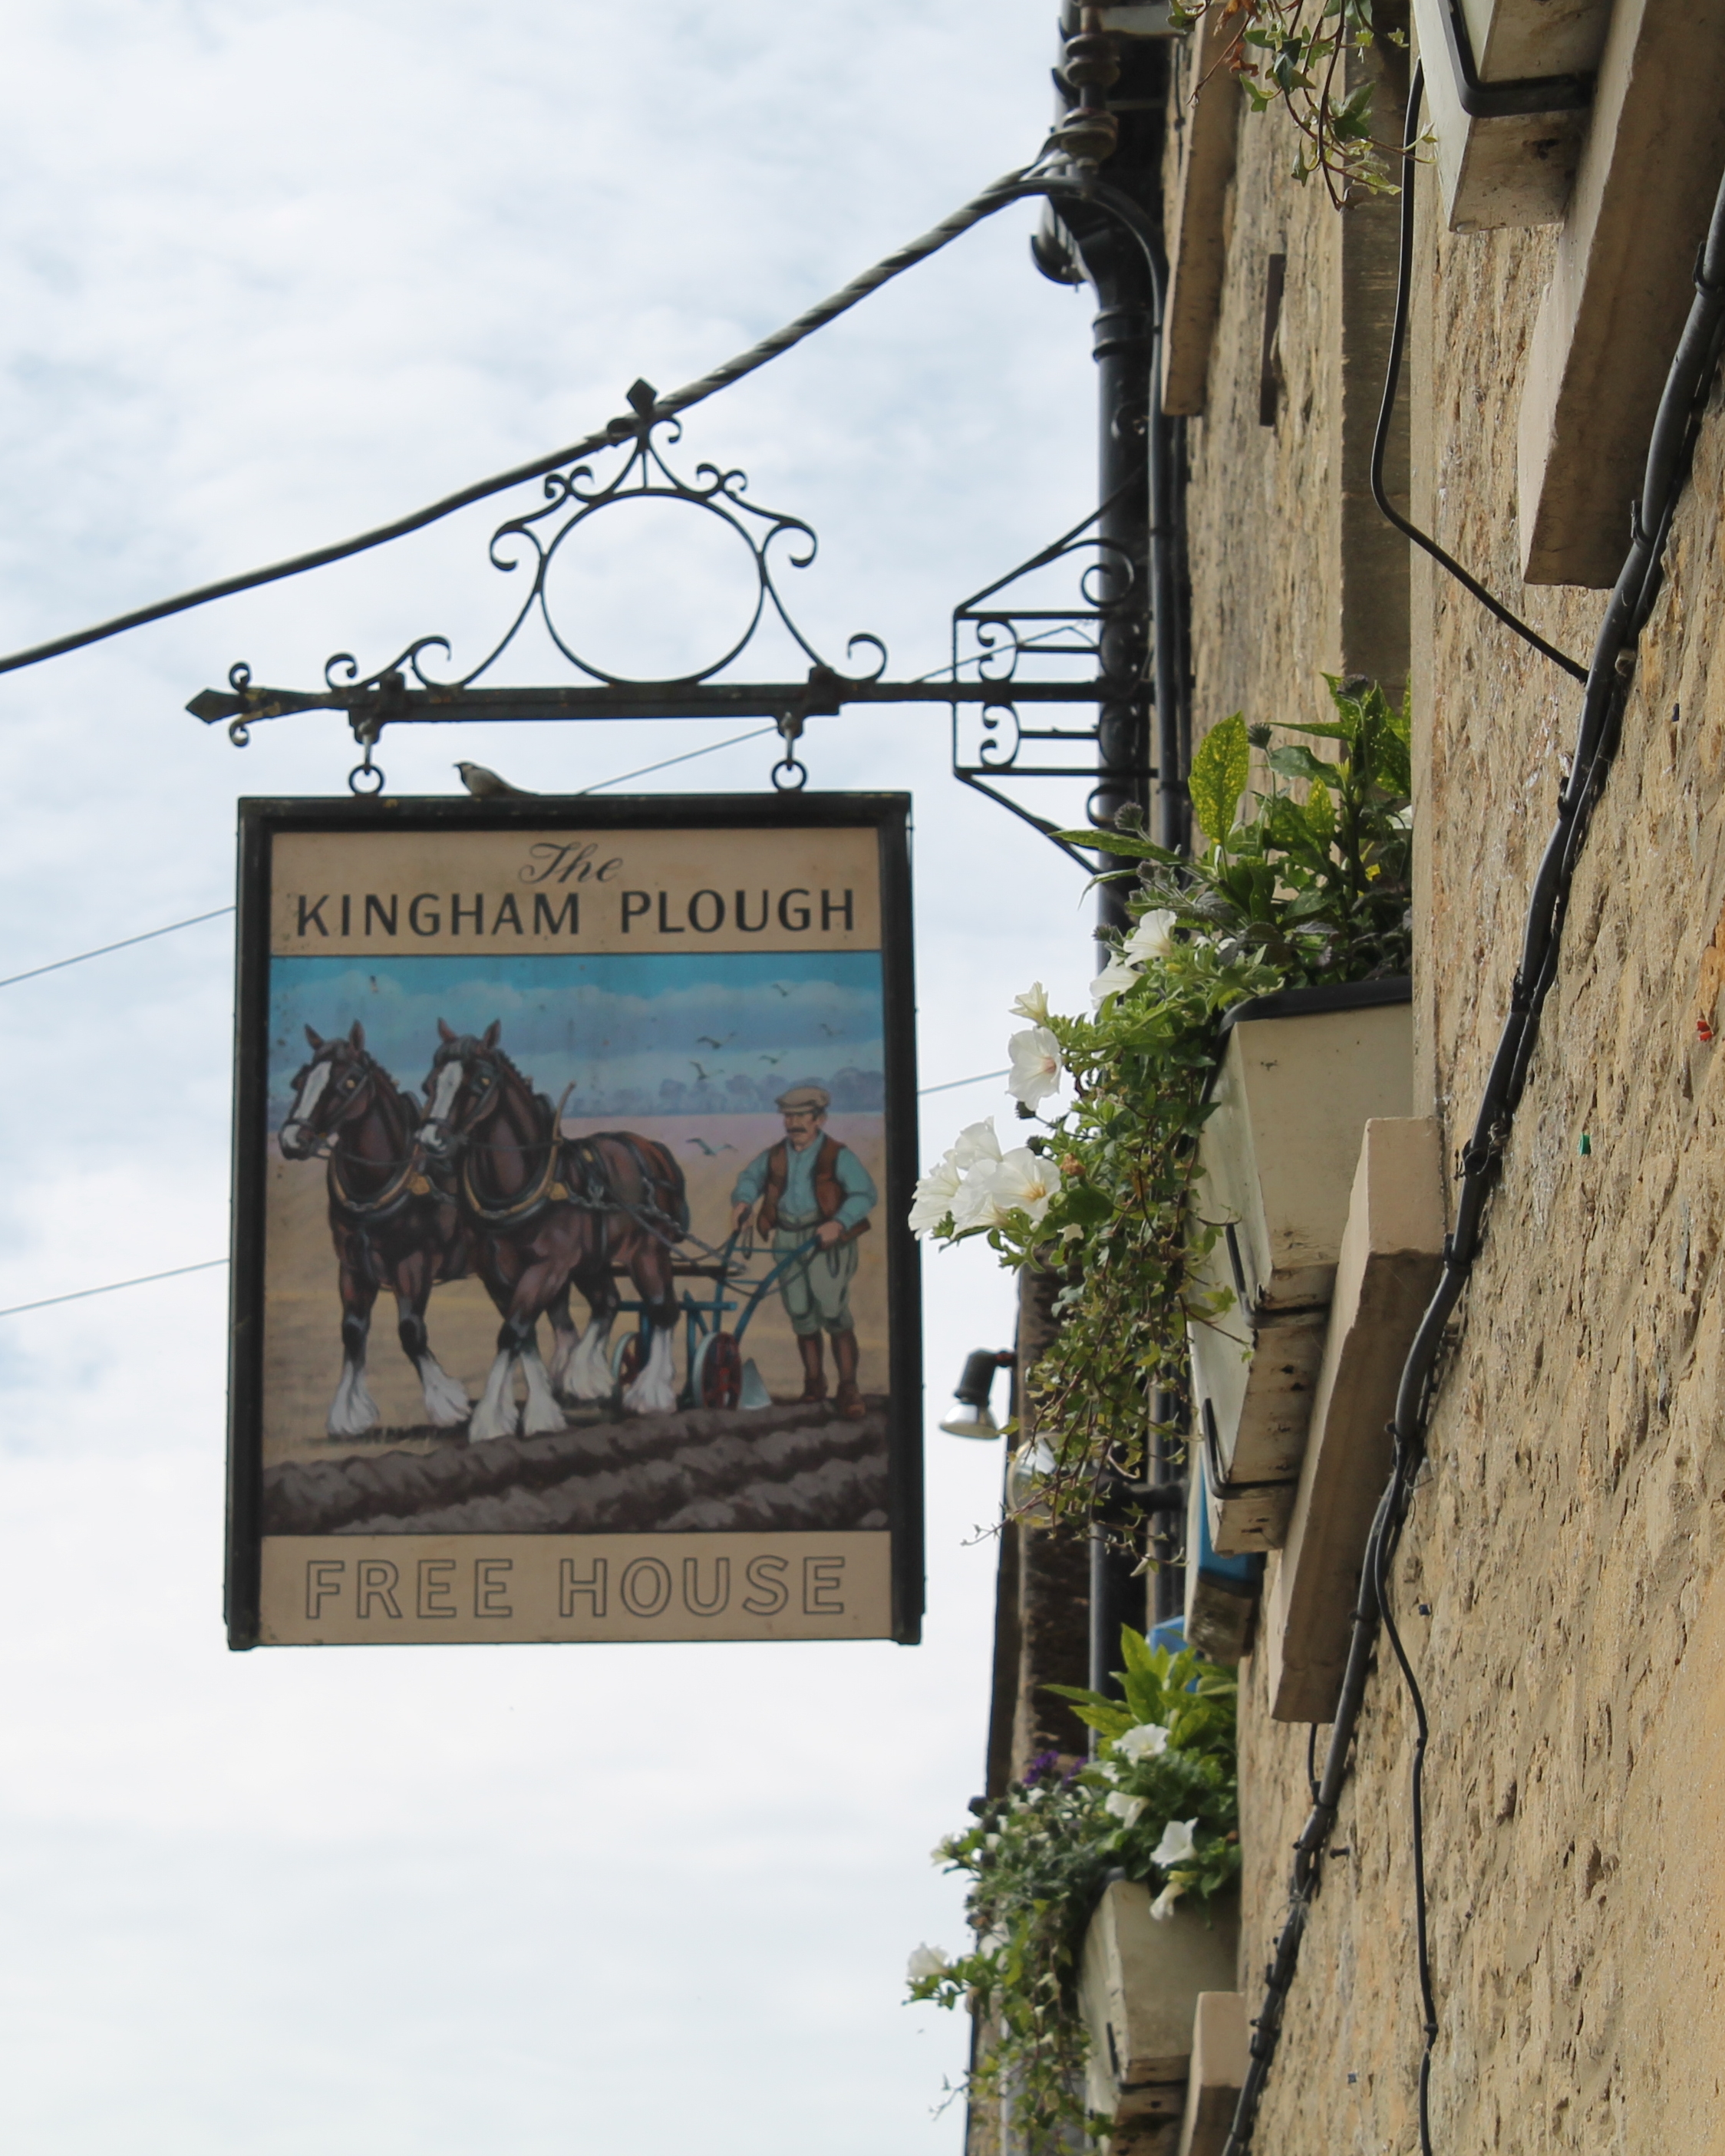 The sign of the Kingham Plough